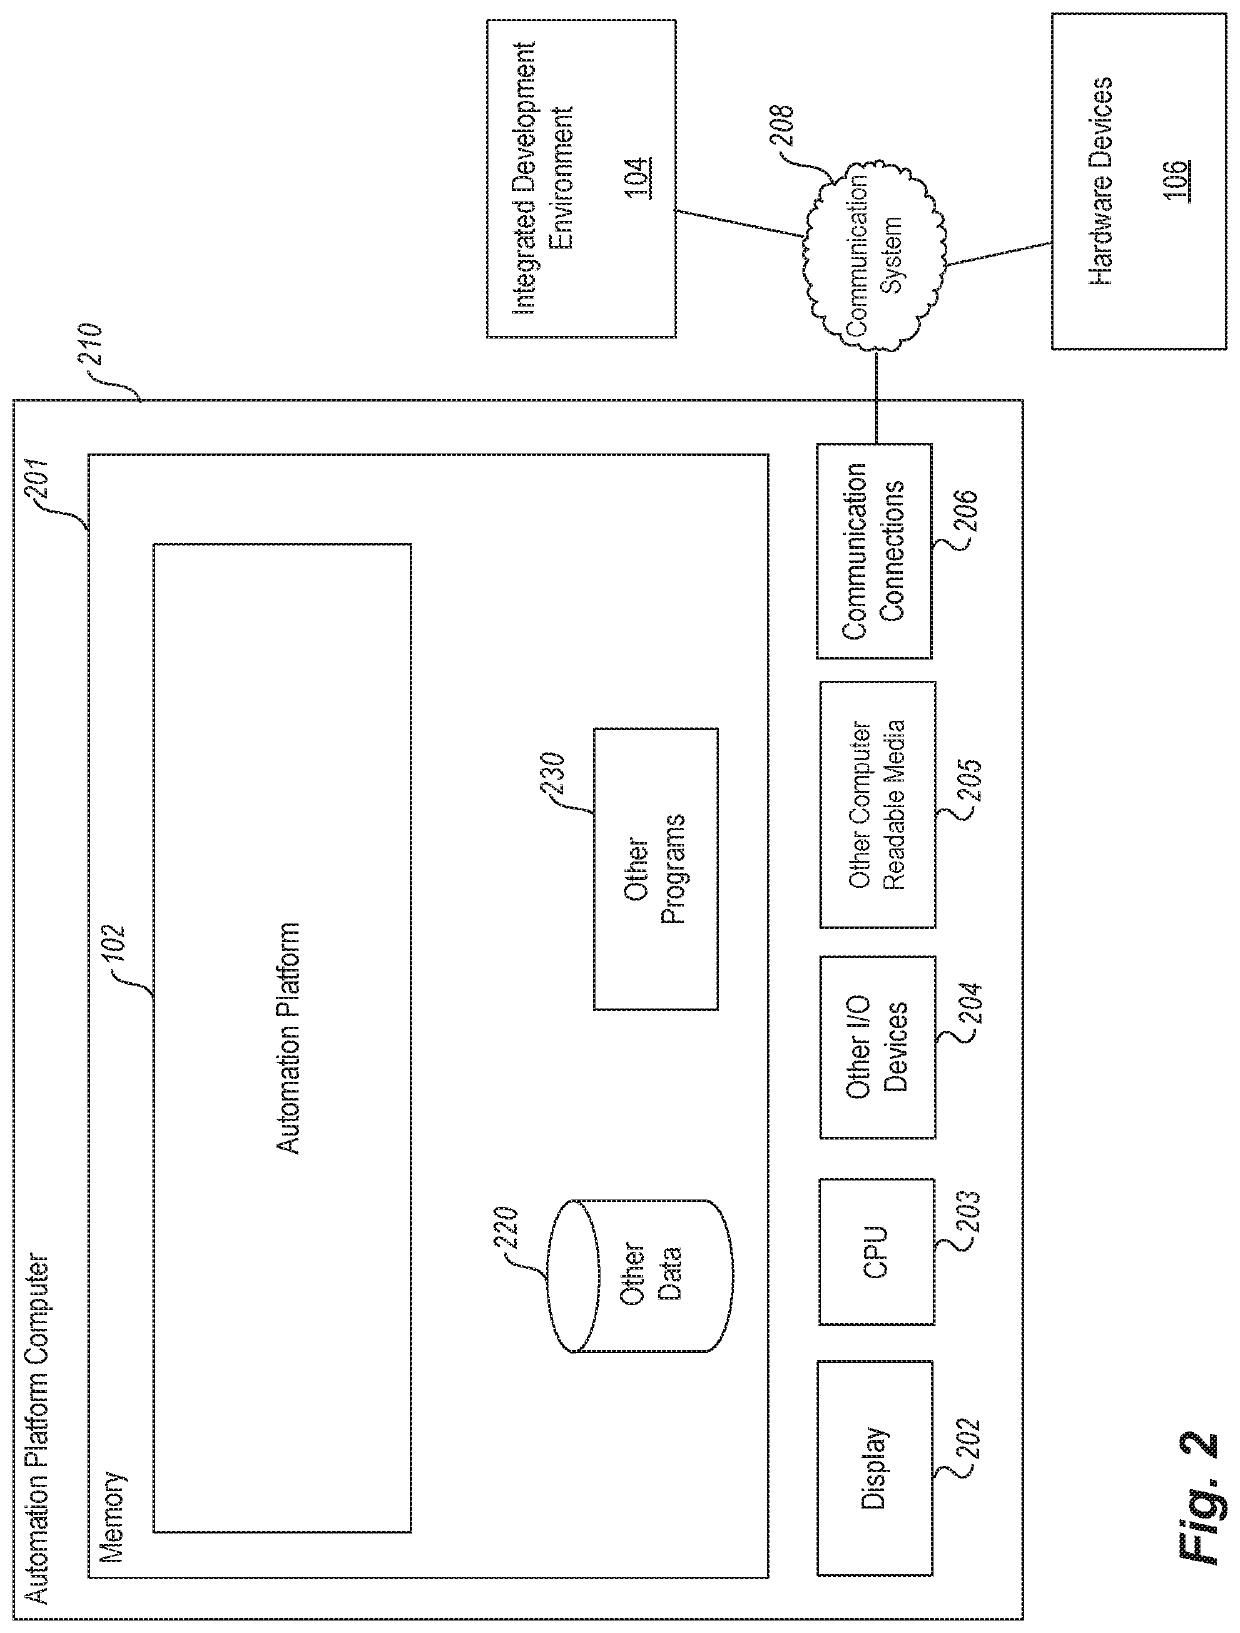 Disaggregated distributed measurement analysis system using dynamic application builder